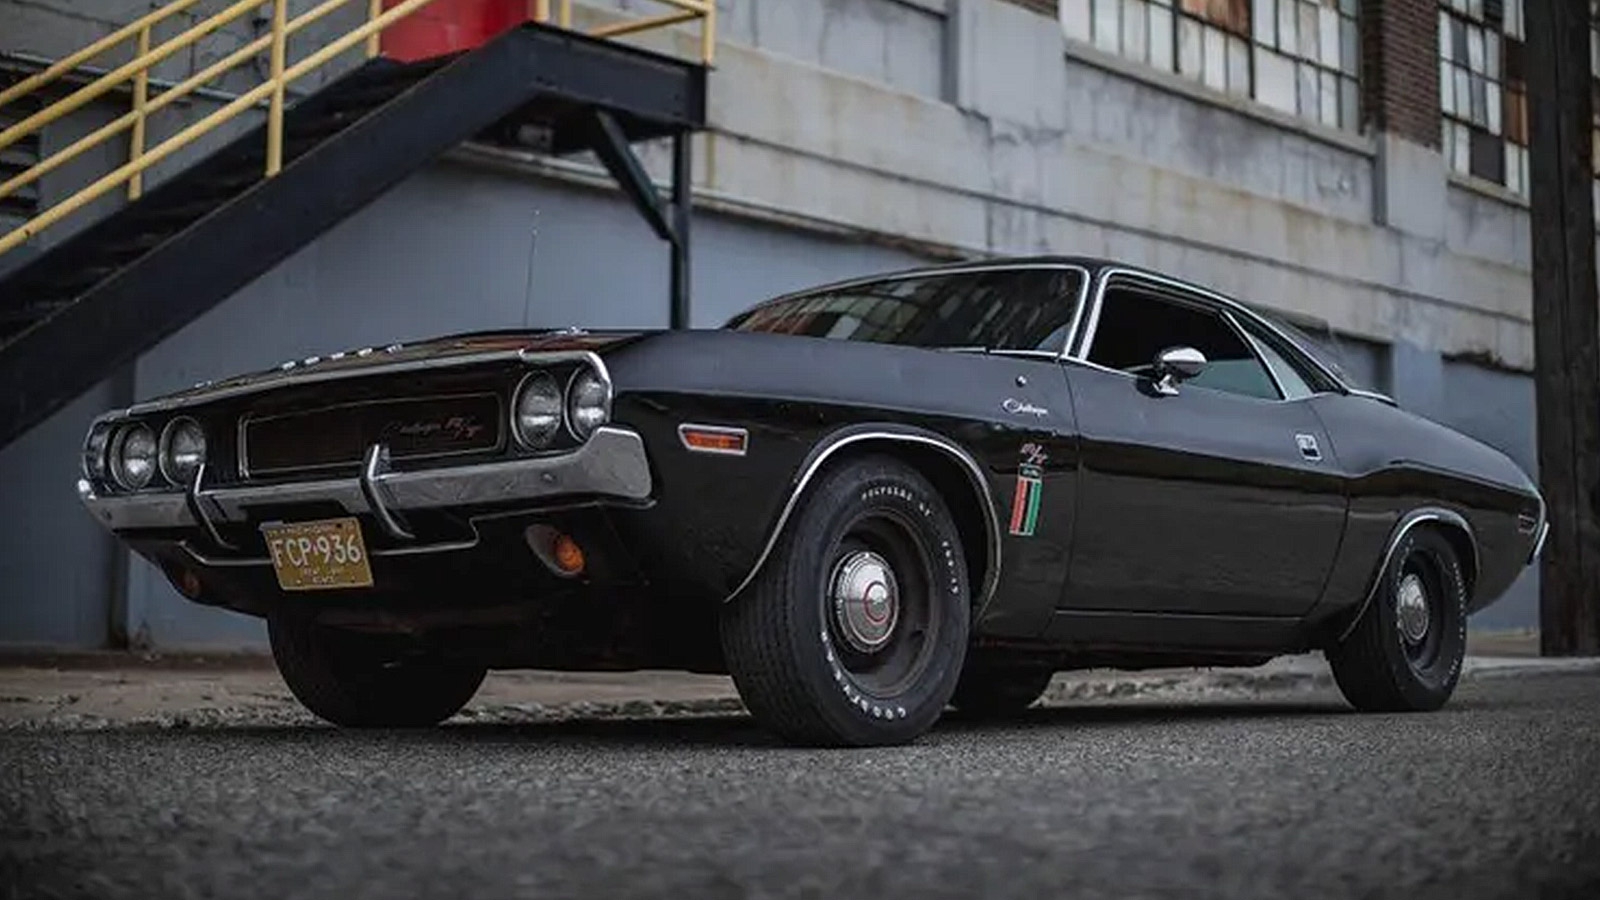 The Black Ghost - 1970 Challenger R/T SE